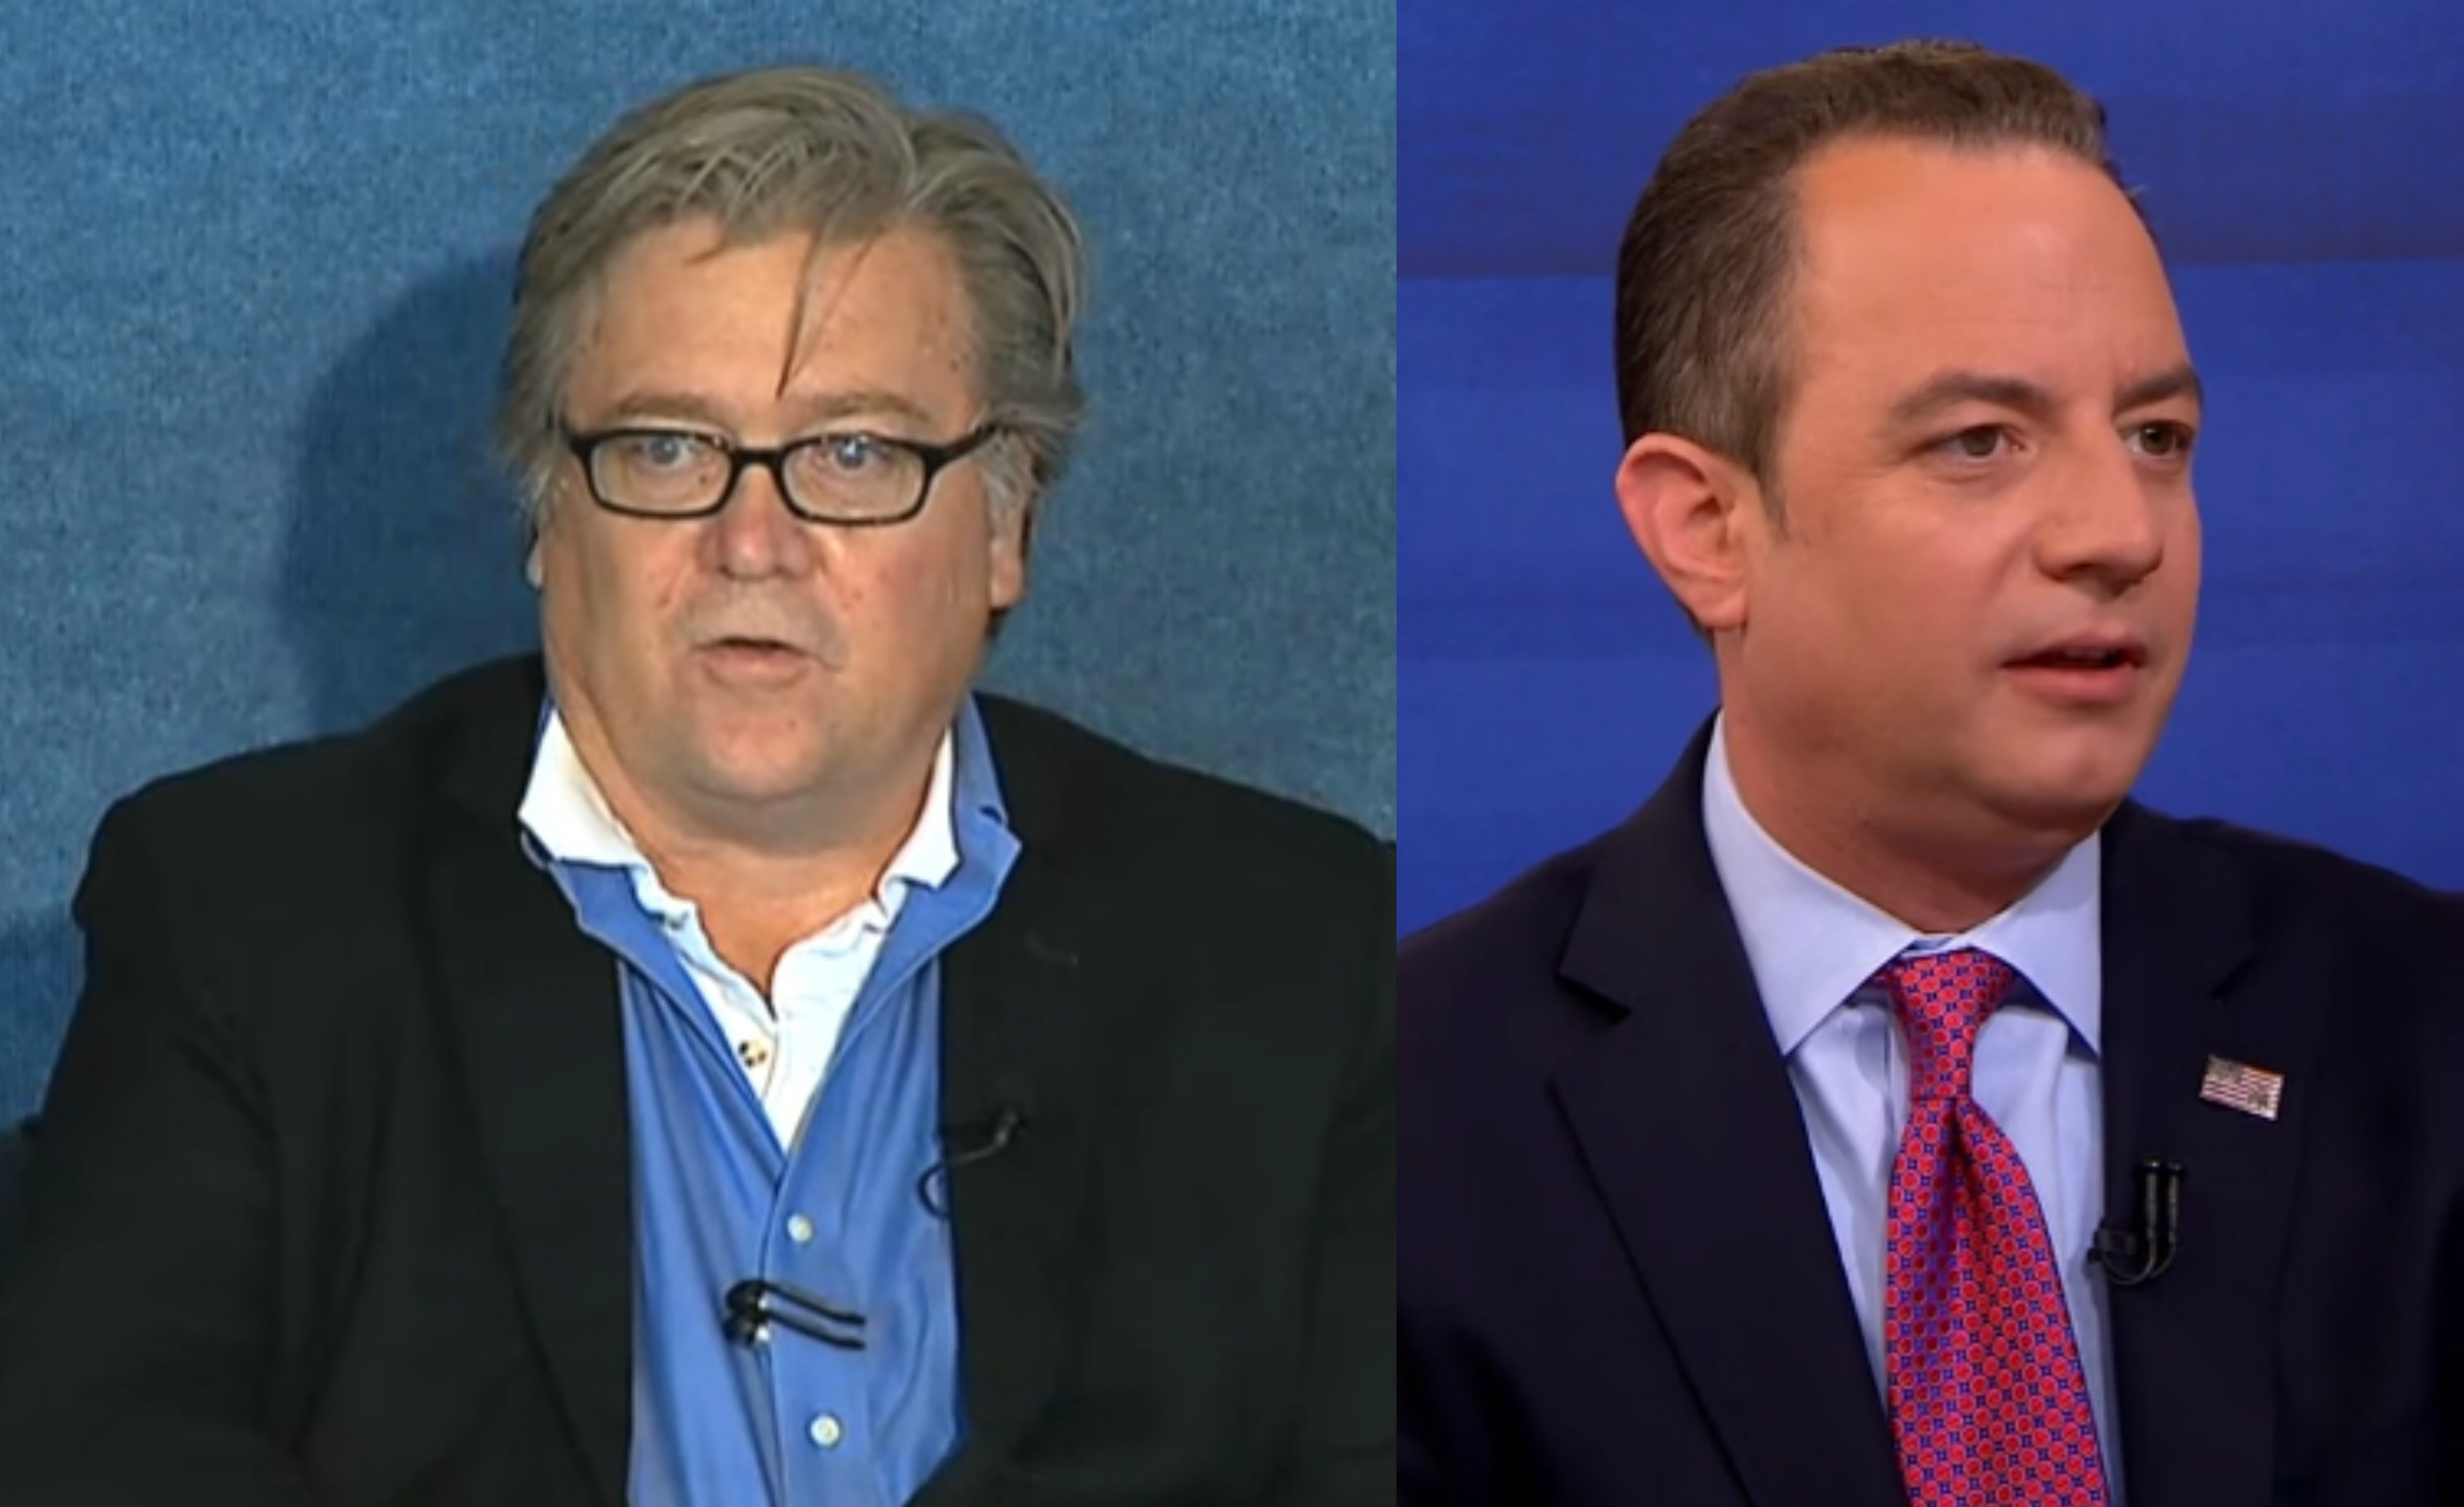 Donald Trump picks Reince Priebus as chief of staff and Stephen Bannon as strategist